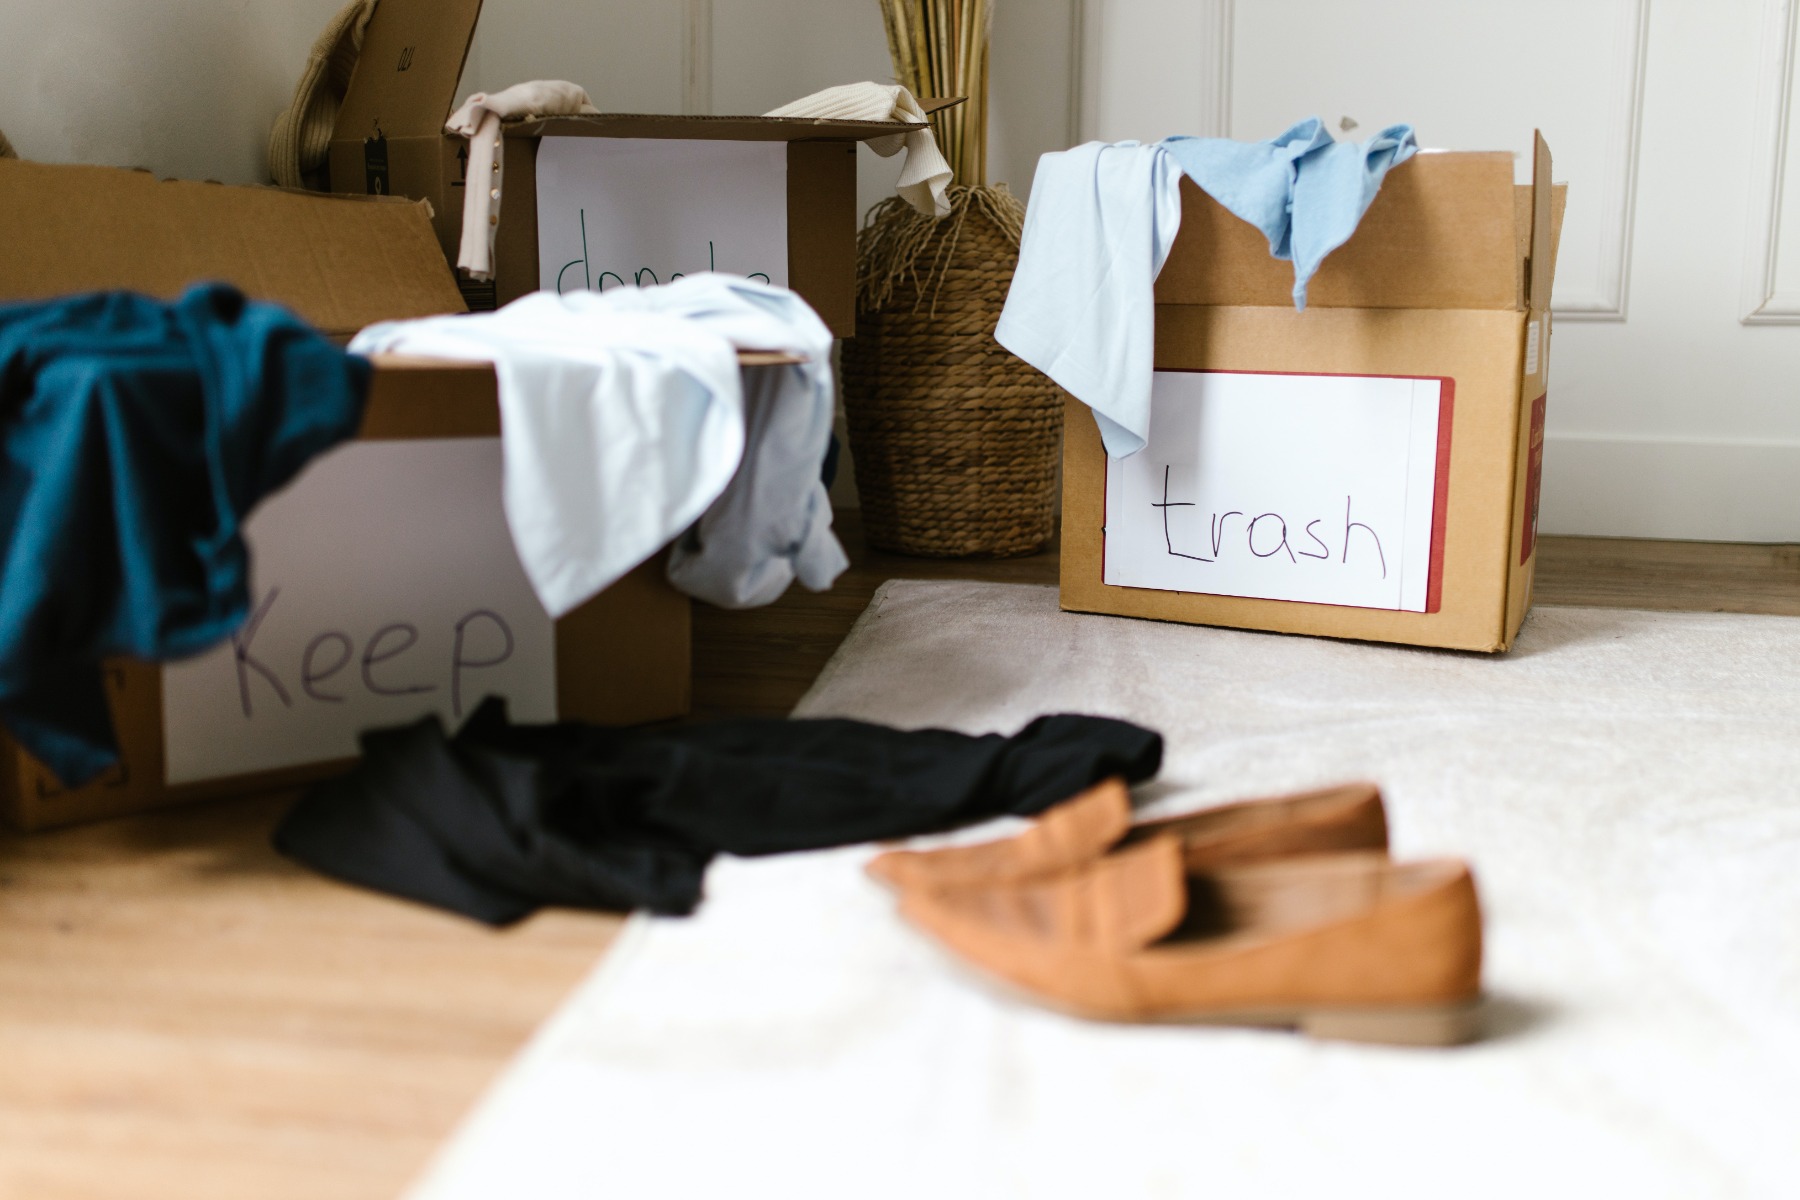 An image of cardboard boxes with clothes and shoes